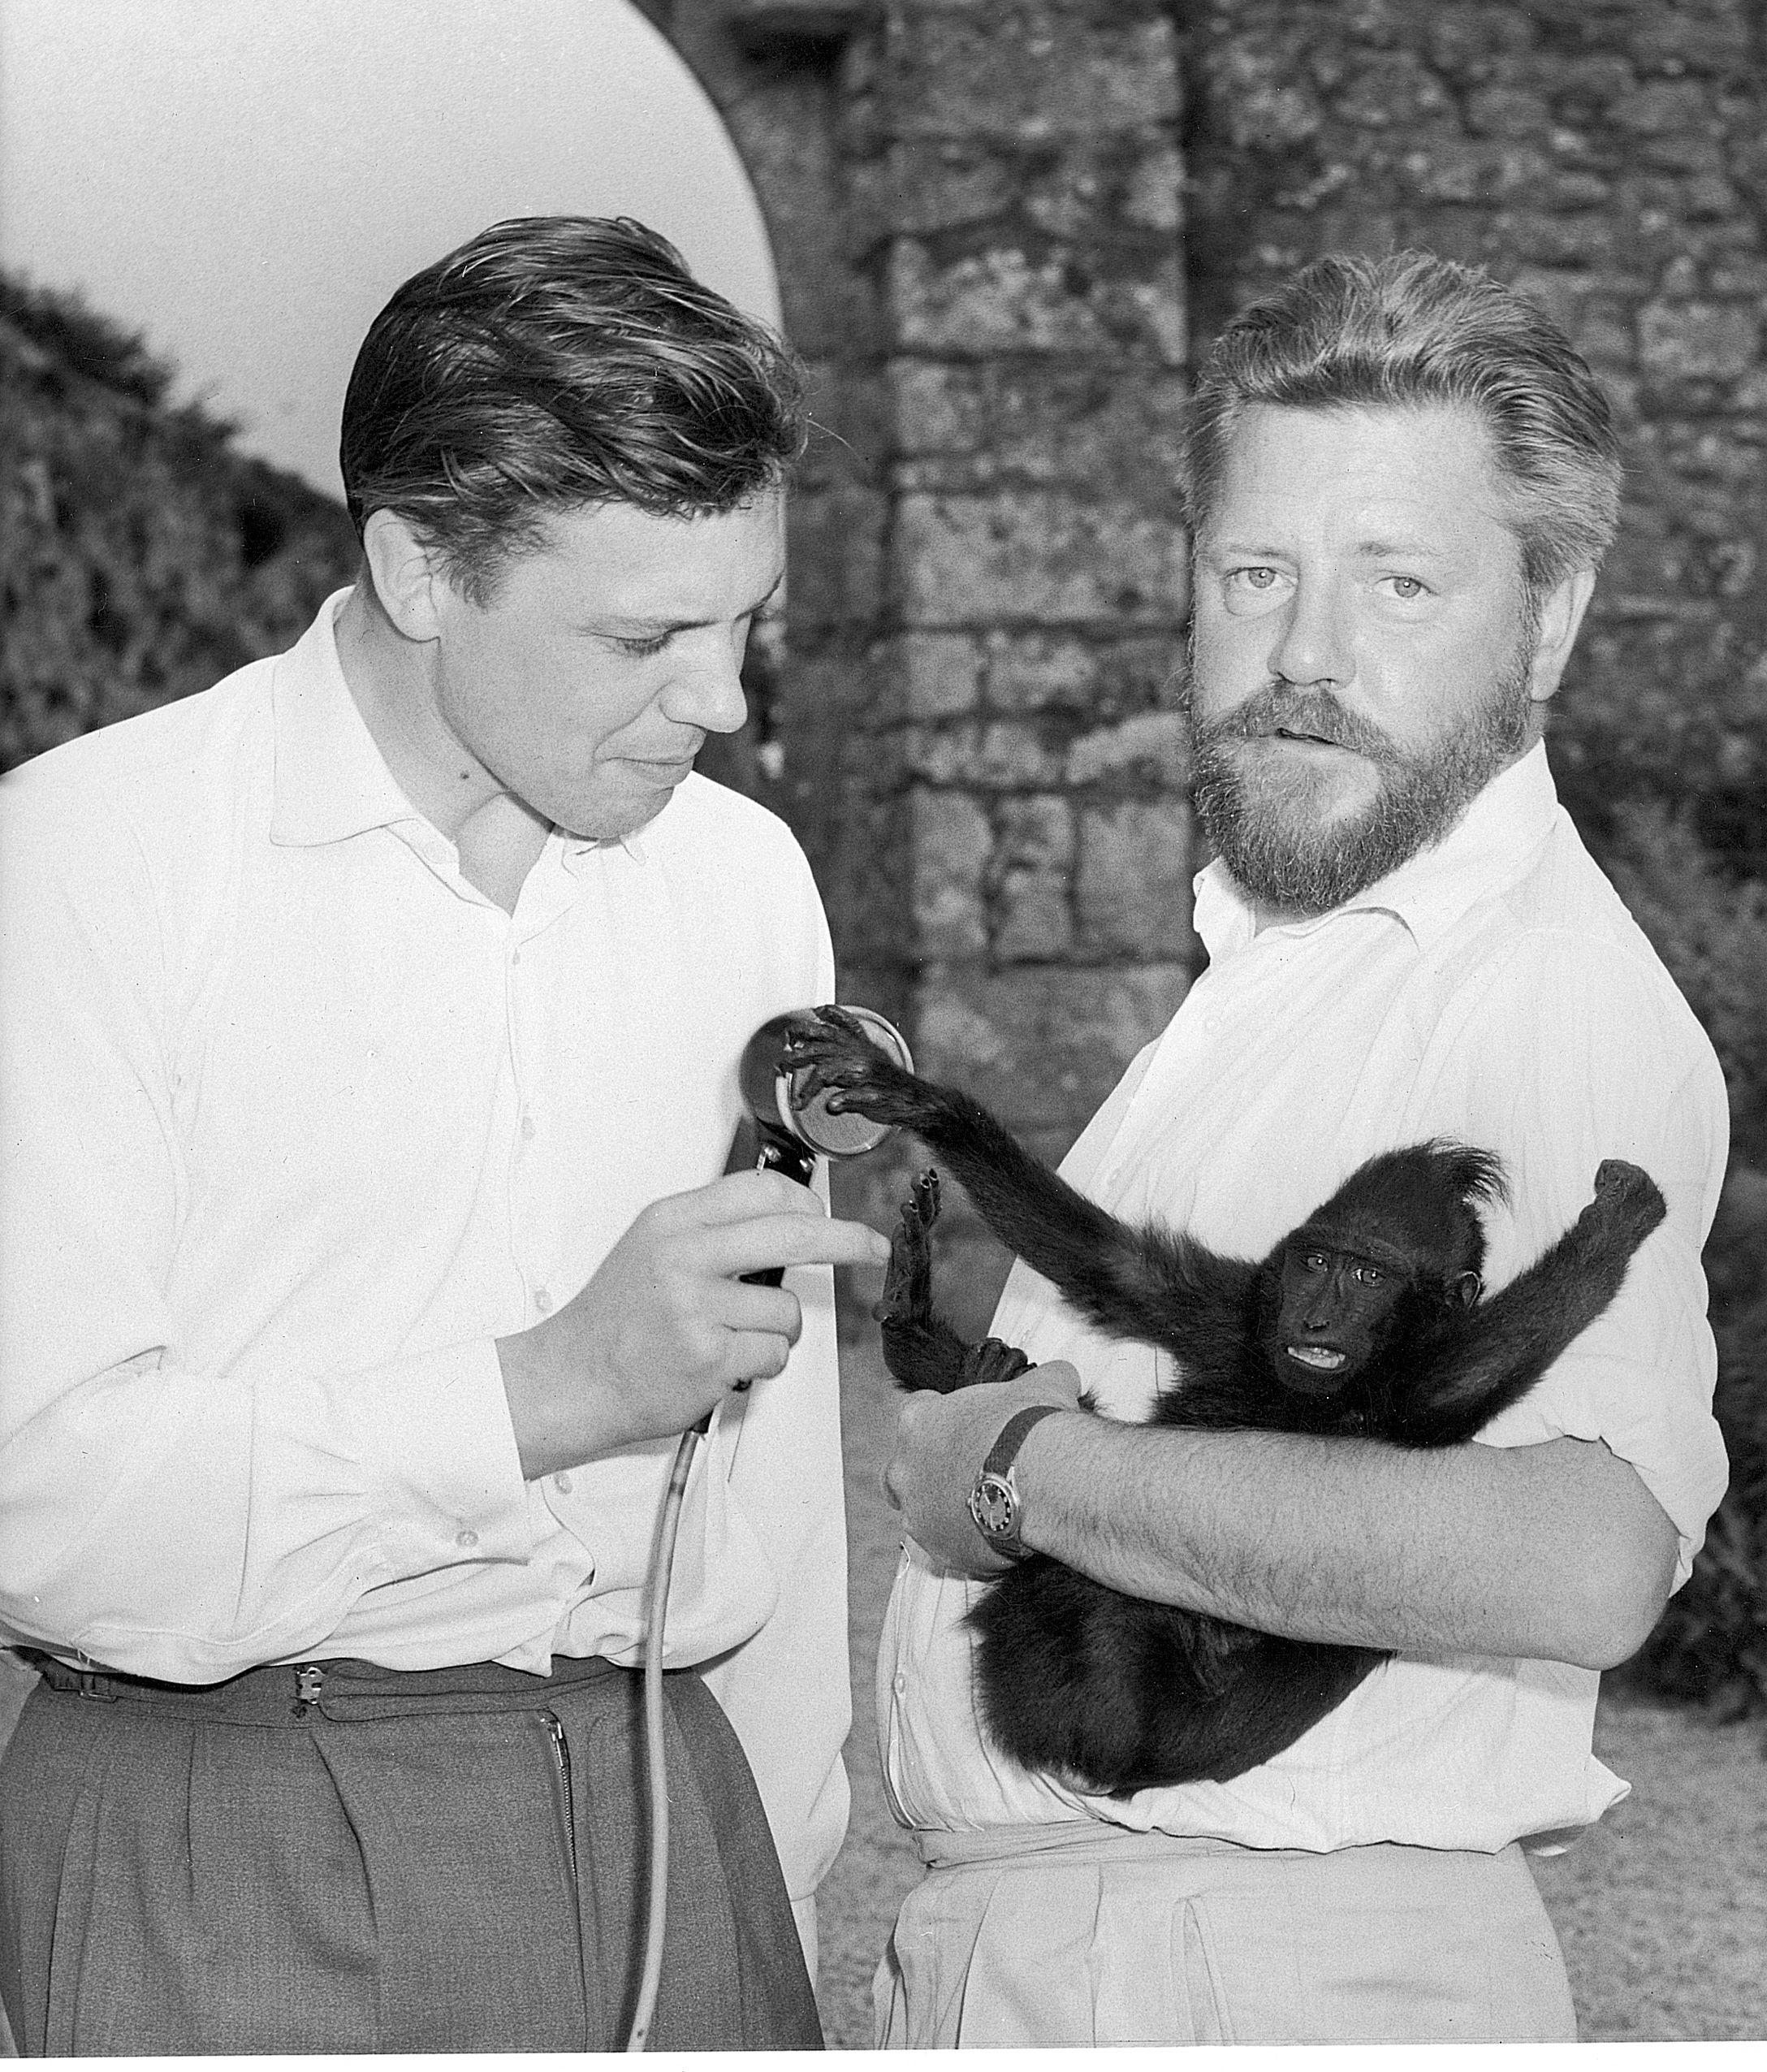 A GORILLA IN THE GUEST ROOM  CHARACTERIZATION  NPONGO NANDY  GERALD  DURRELL  iscenglish  YouTube